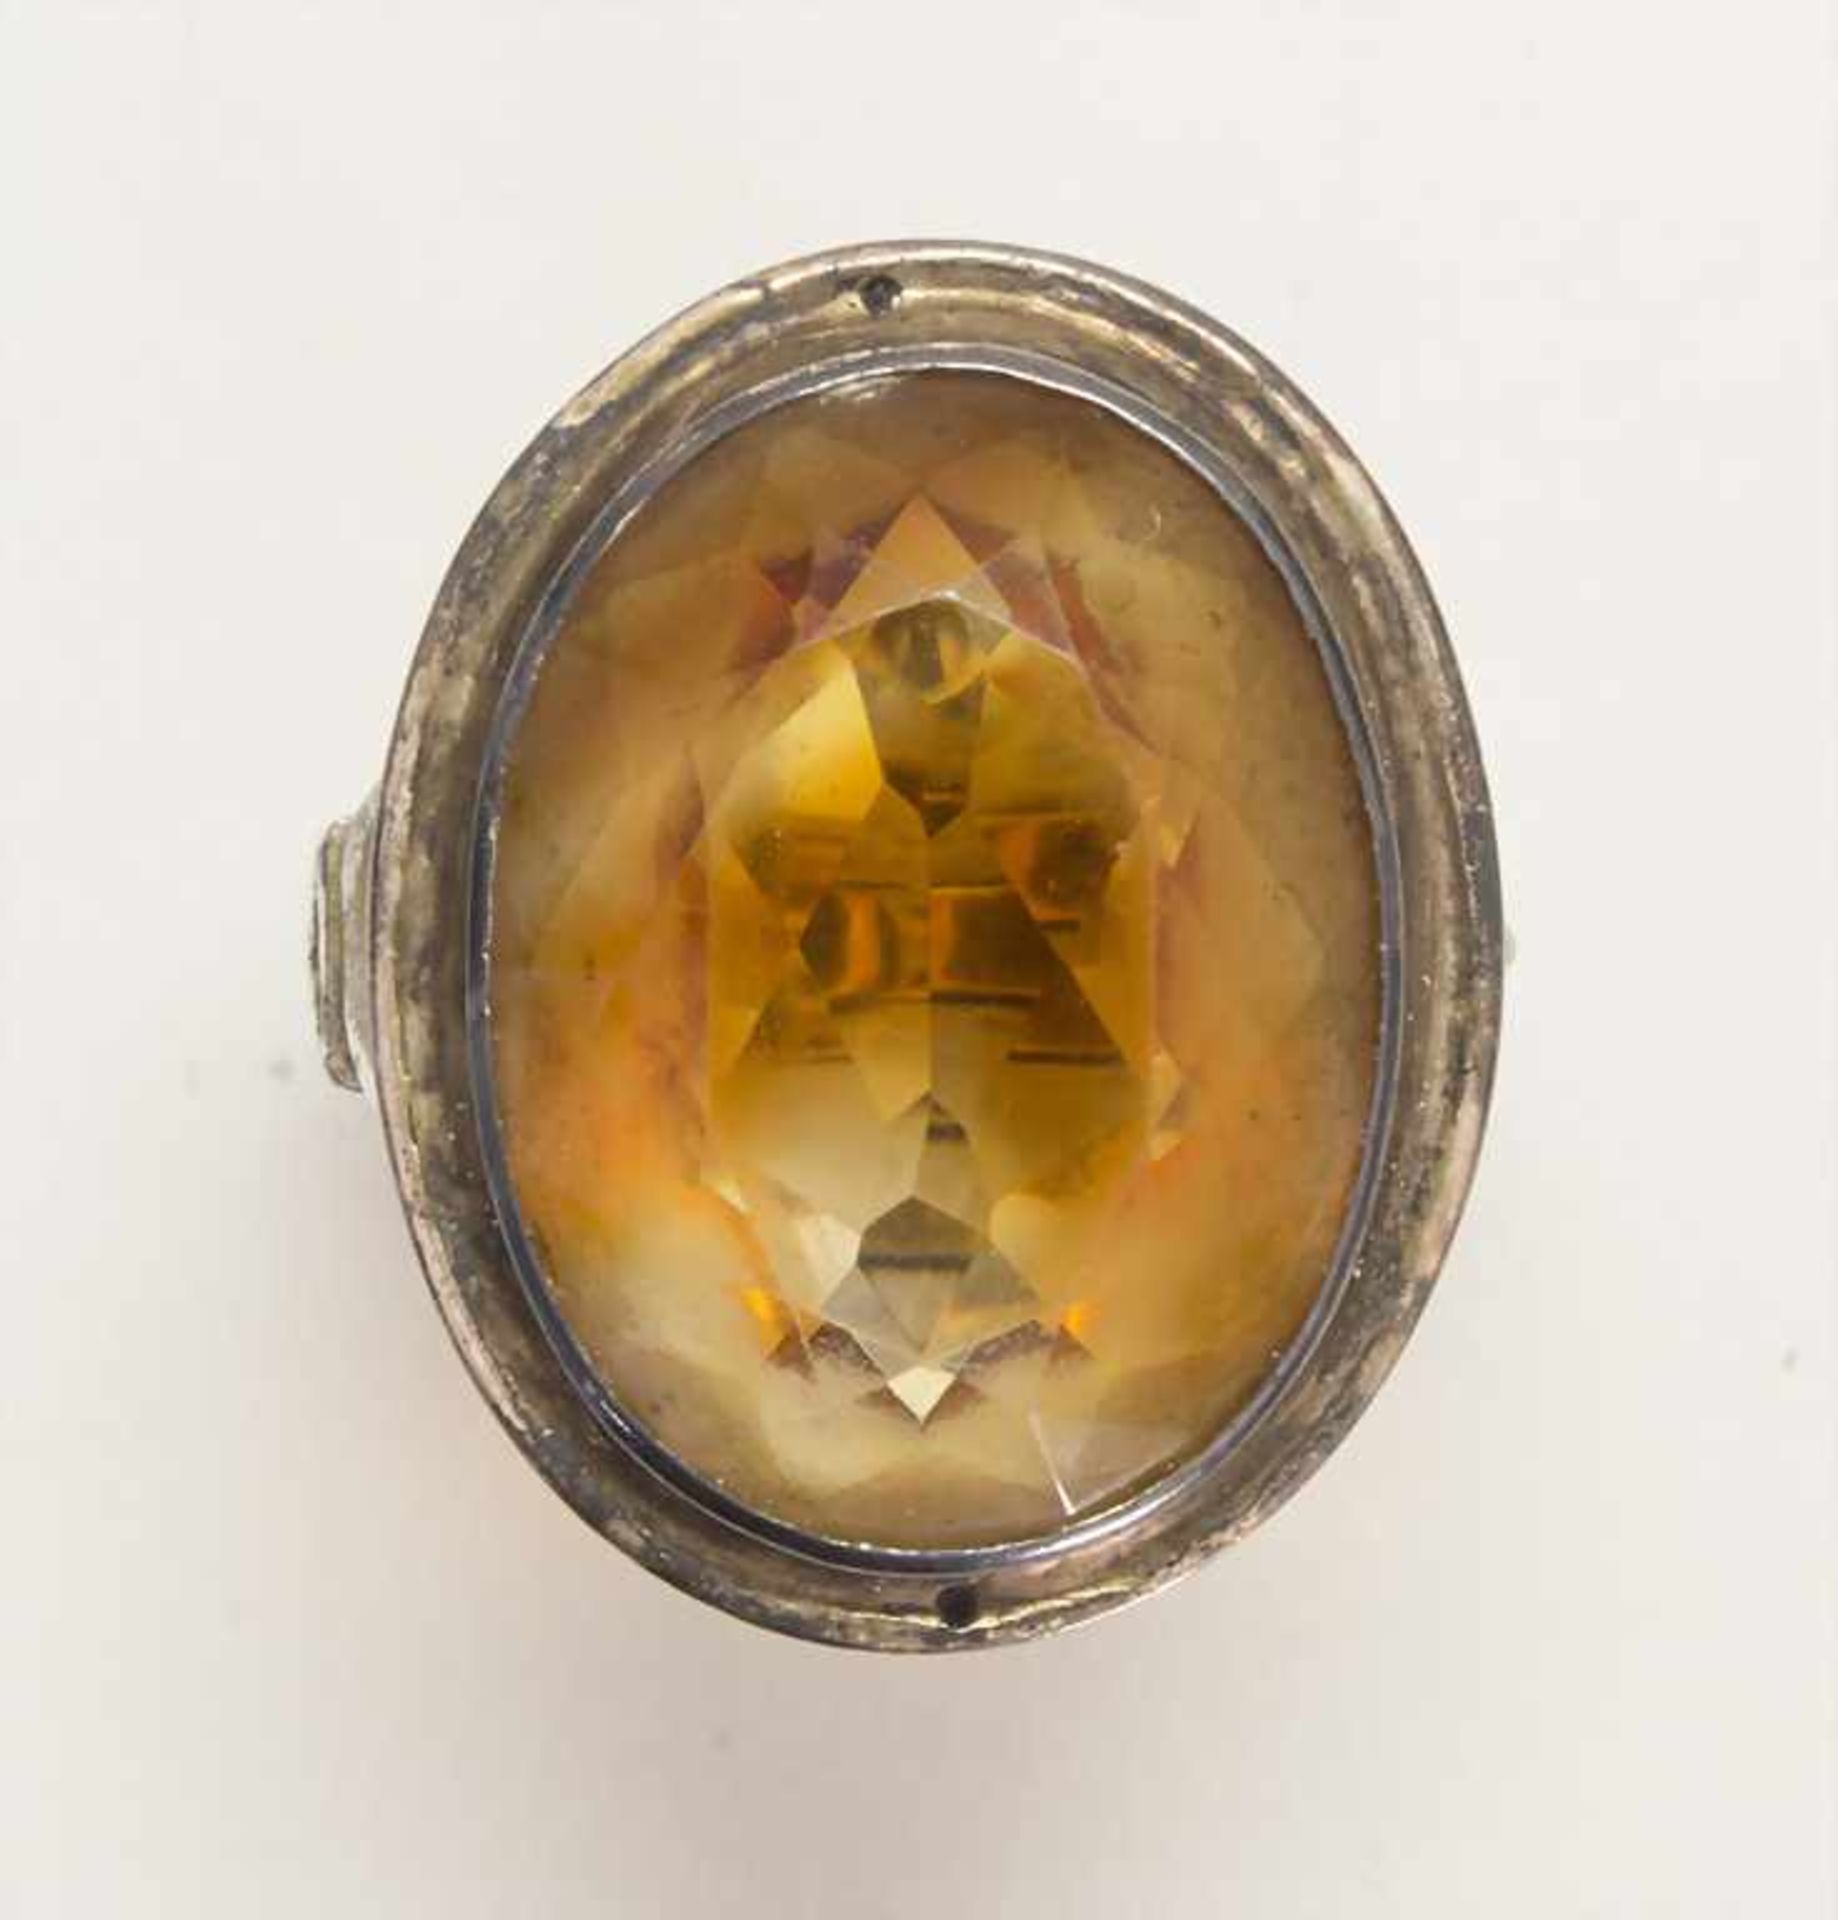 Damenring mit Rauchtopas / A ladies ring with smoky topaz, Ende 19. Jh. - Image 2 of 3